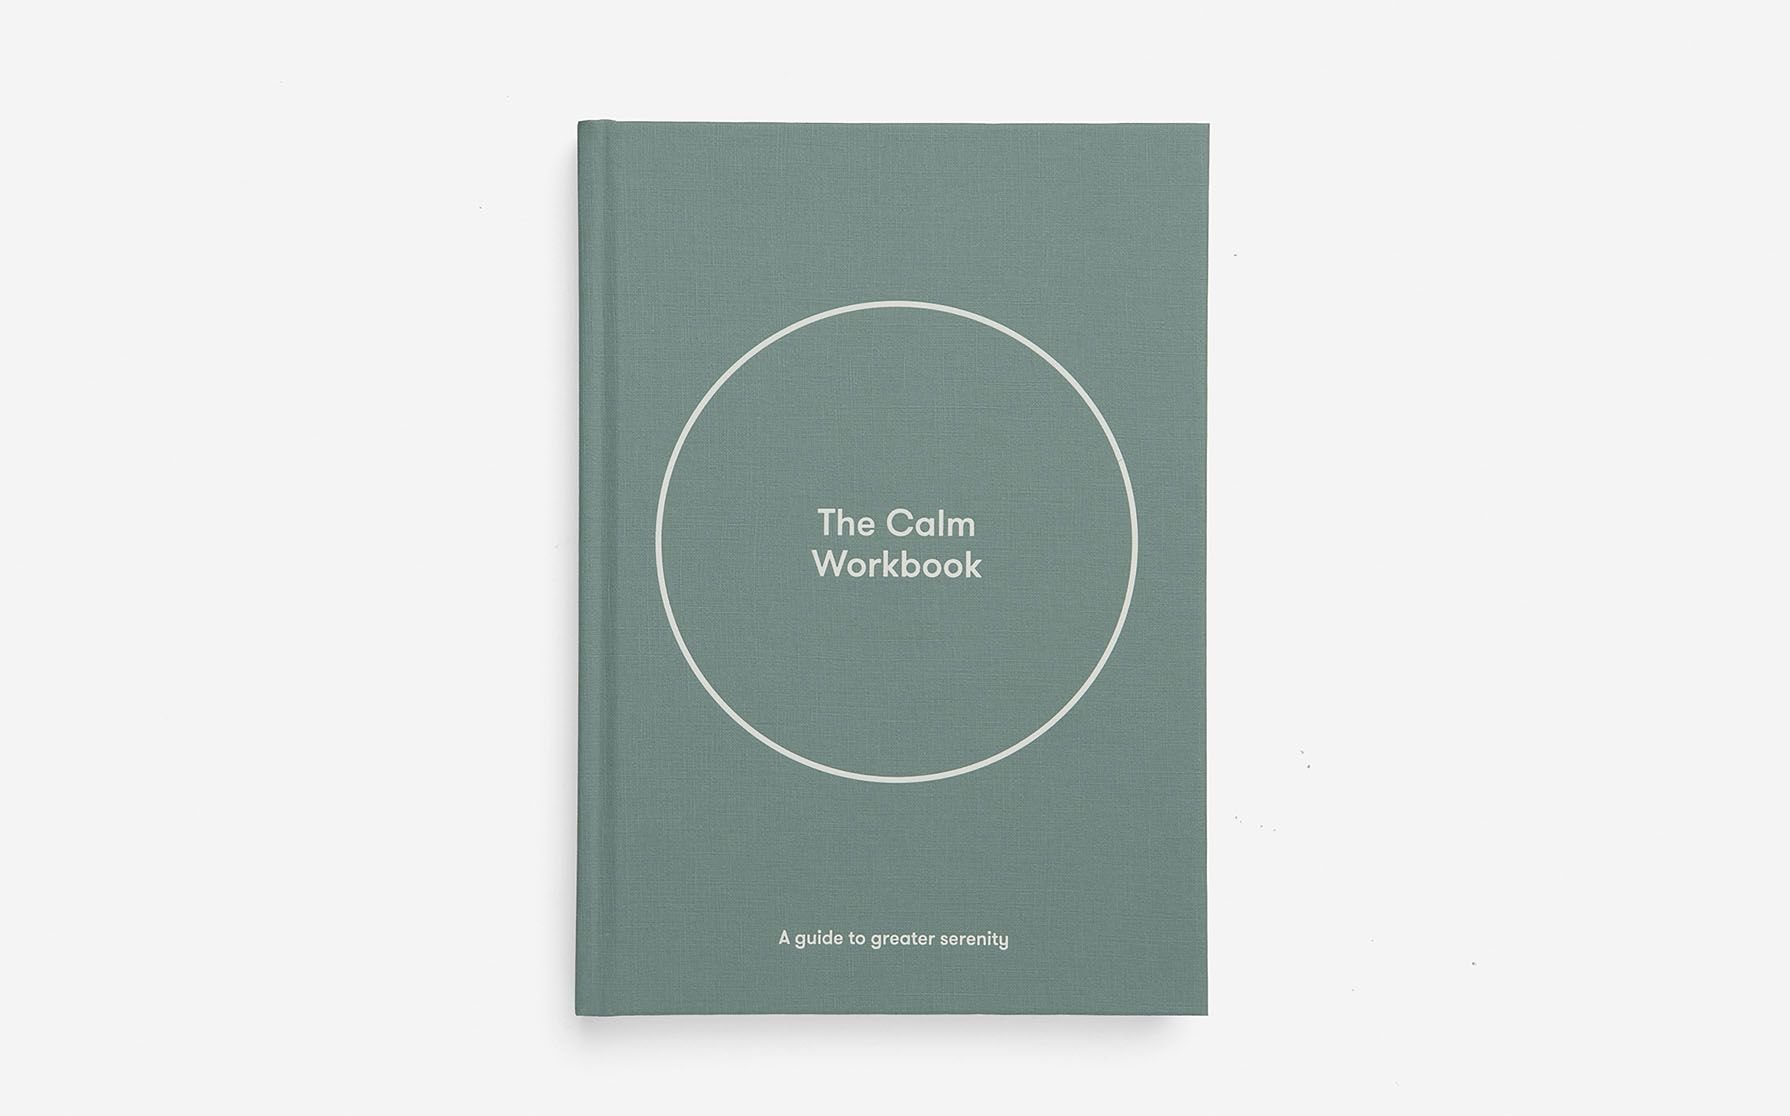 (ENG) The Calm Workbook / School of life